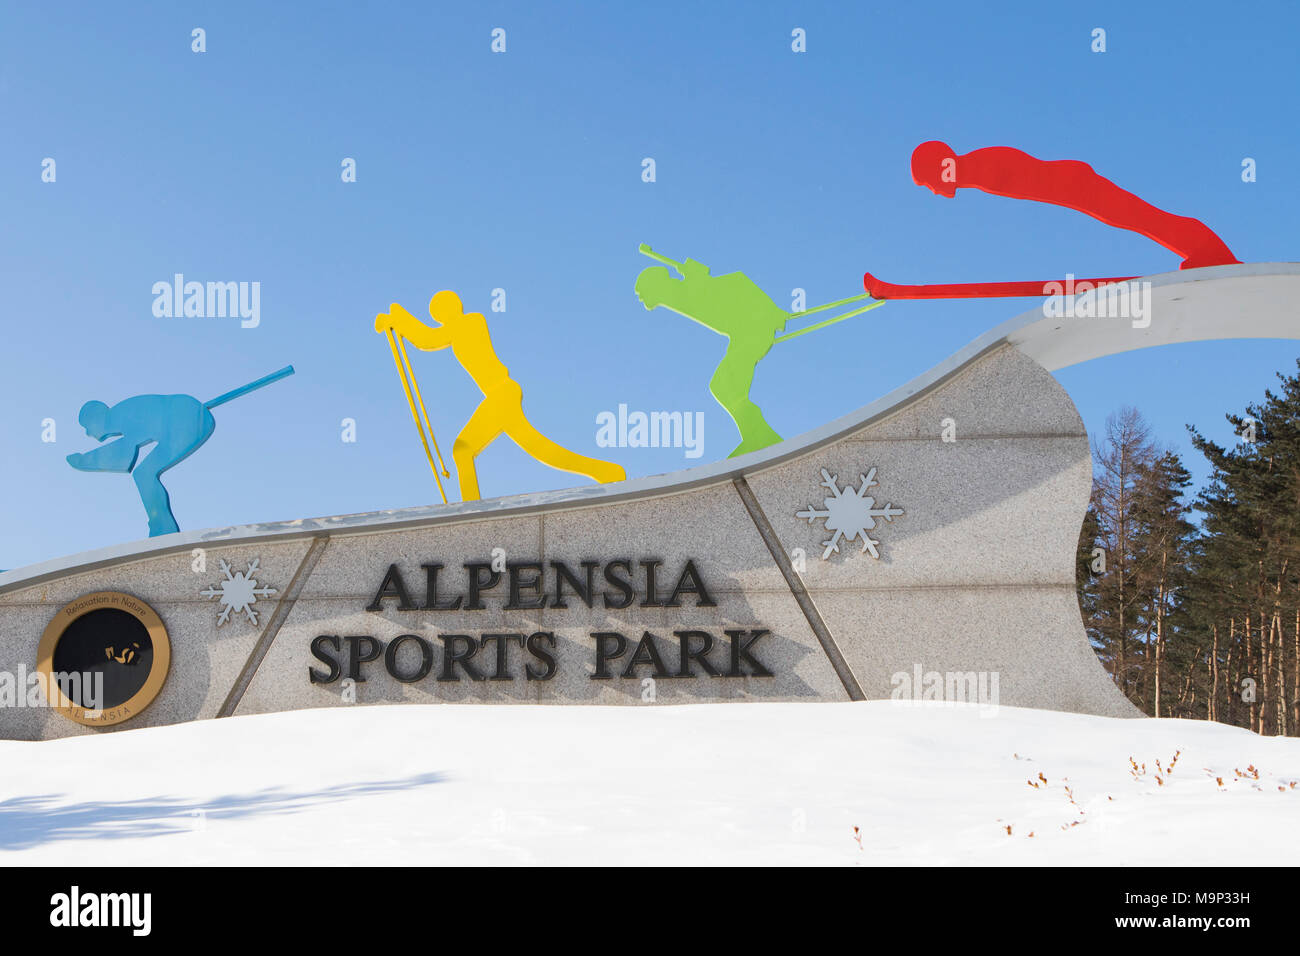 The entrance of the sport arena at Alpensia Resort in South Korea.  The Alpensia Resort is a ski resort and a tourist attraction. It is located on the territory of the township of Daegwallyeong-myeon, in the county of Pyeongchang, hosting the Winter Olympics in February 2018.  The ski resort is approximately 2.5 hours from Seoul or Incheon Airport by car, predominantly all motorway.   Alpensia has six slopes for skiing and snowboarding, with runs up to 1.4 km (0.87 mi) long, for beginners and advanced skiers, and an area reserved for snowboarders. While the resort is open year-round, the Stock Photo